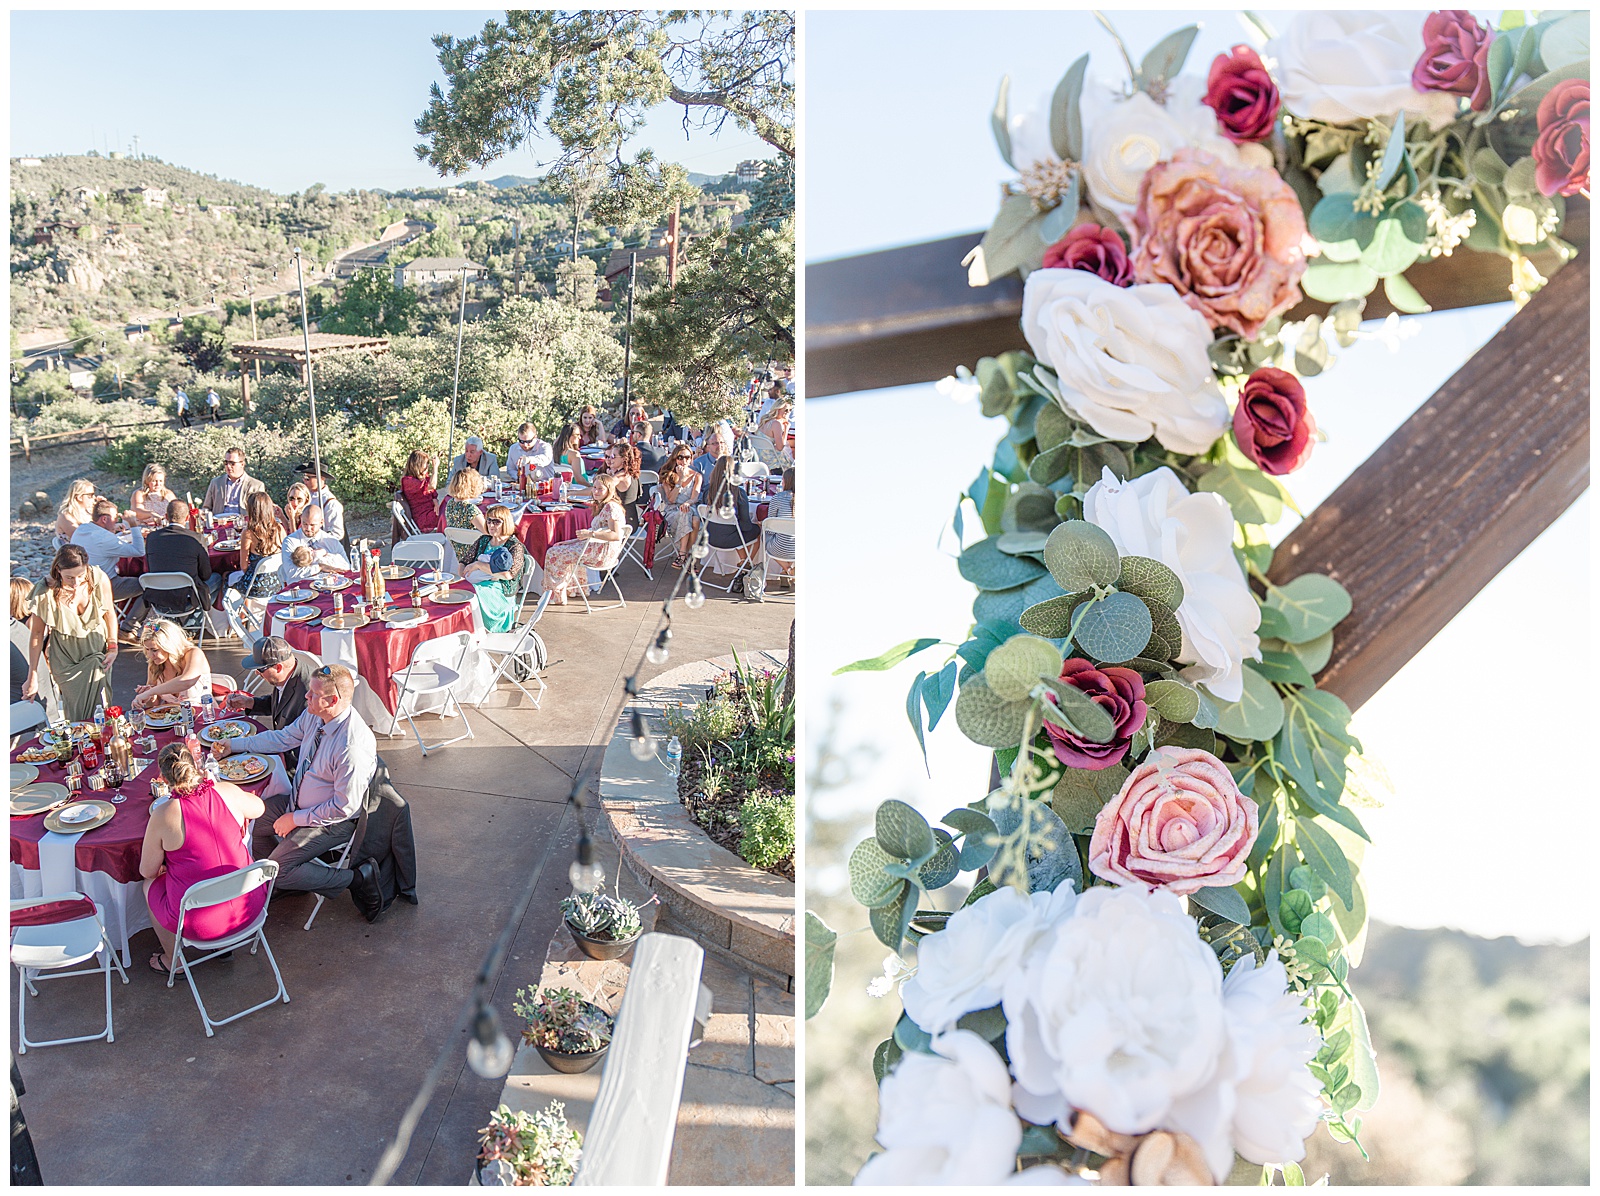 wedding guests sitting at tables with flowers and decorations